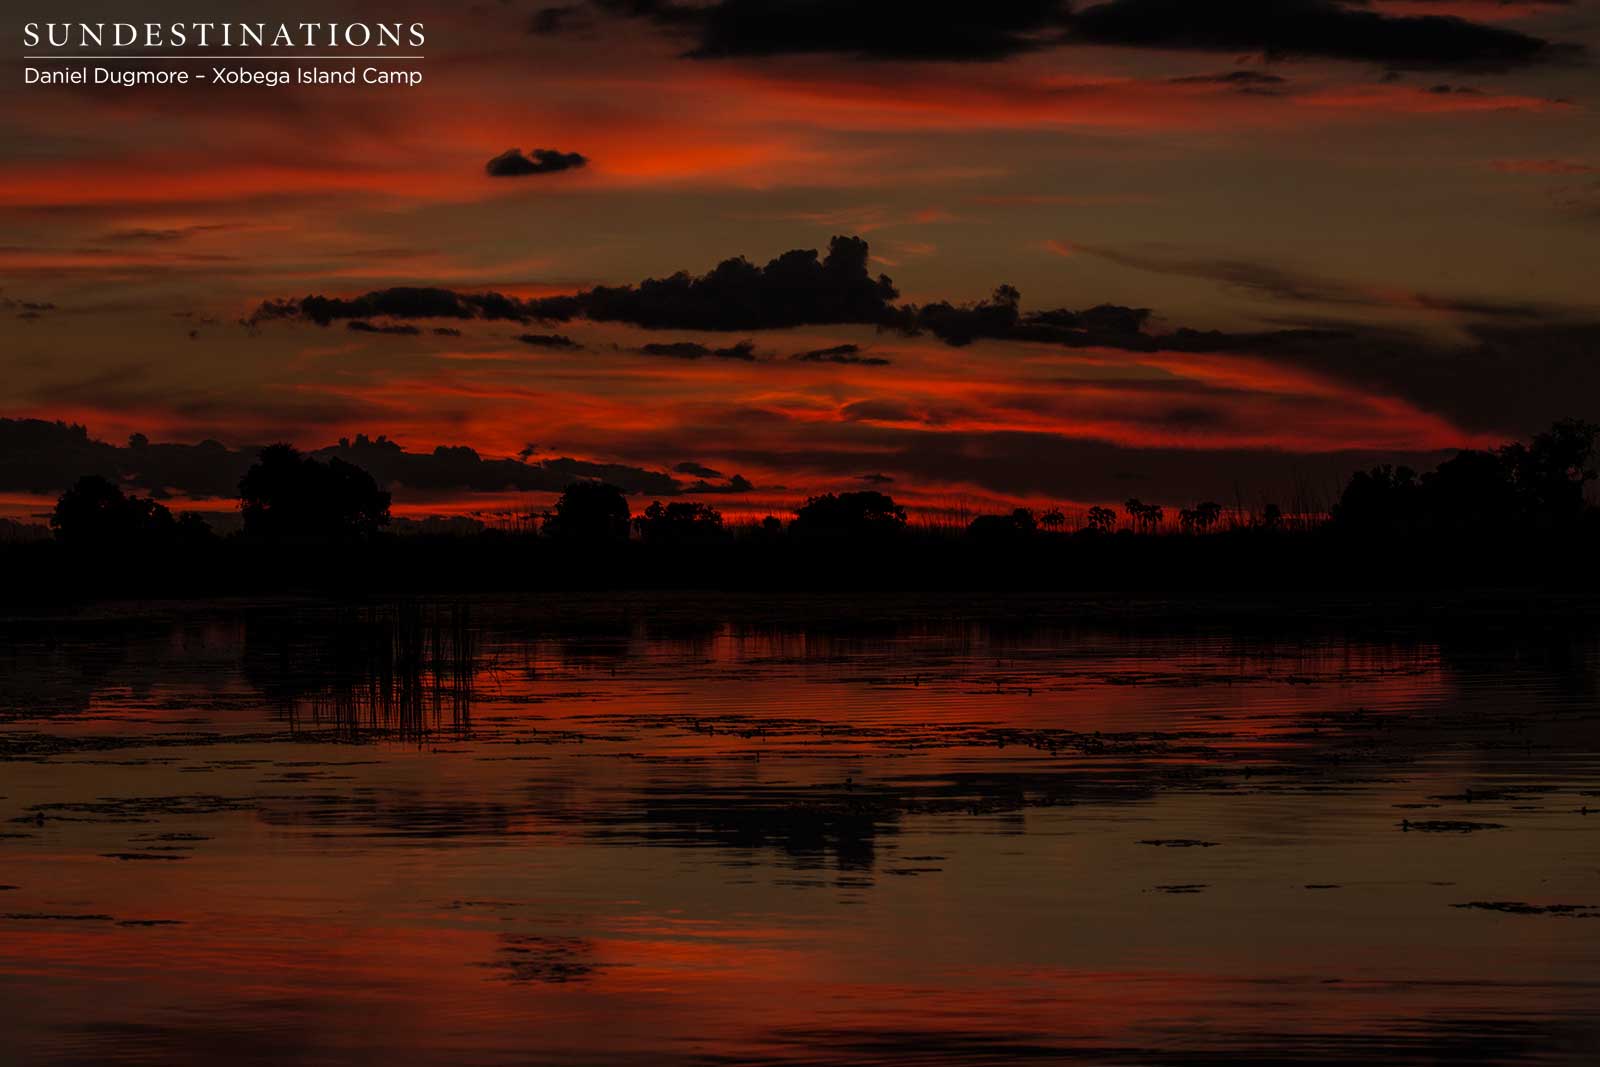 A fiery sunset ending another day in the Okavango Delta, beautifully.